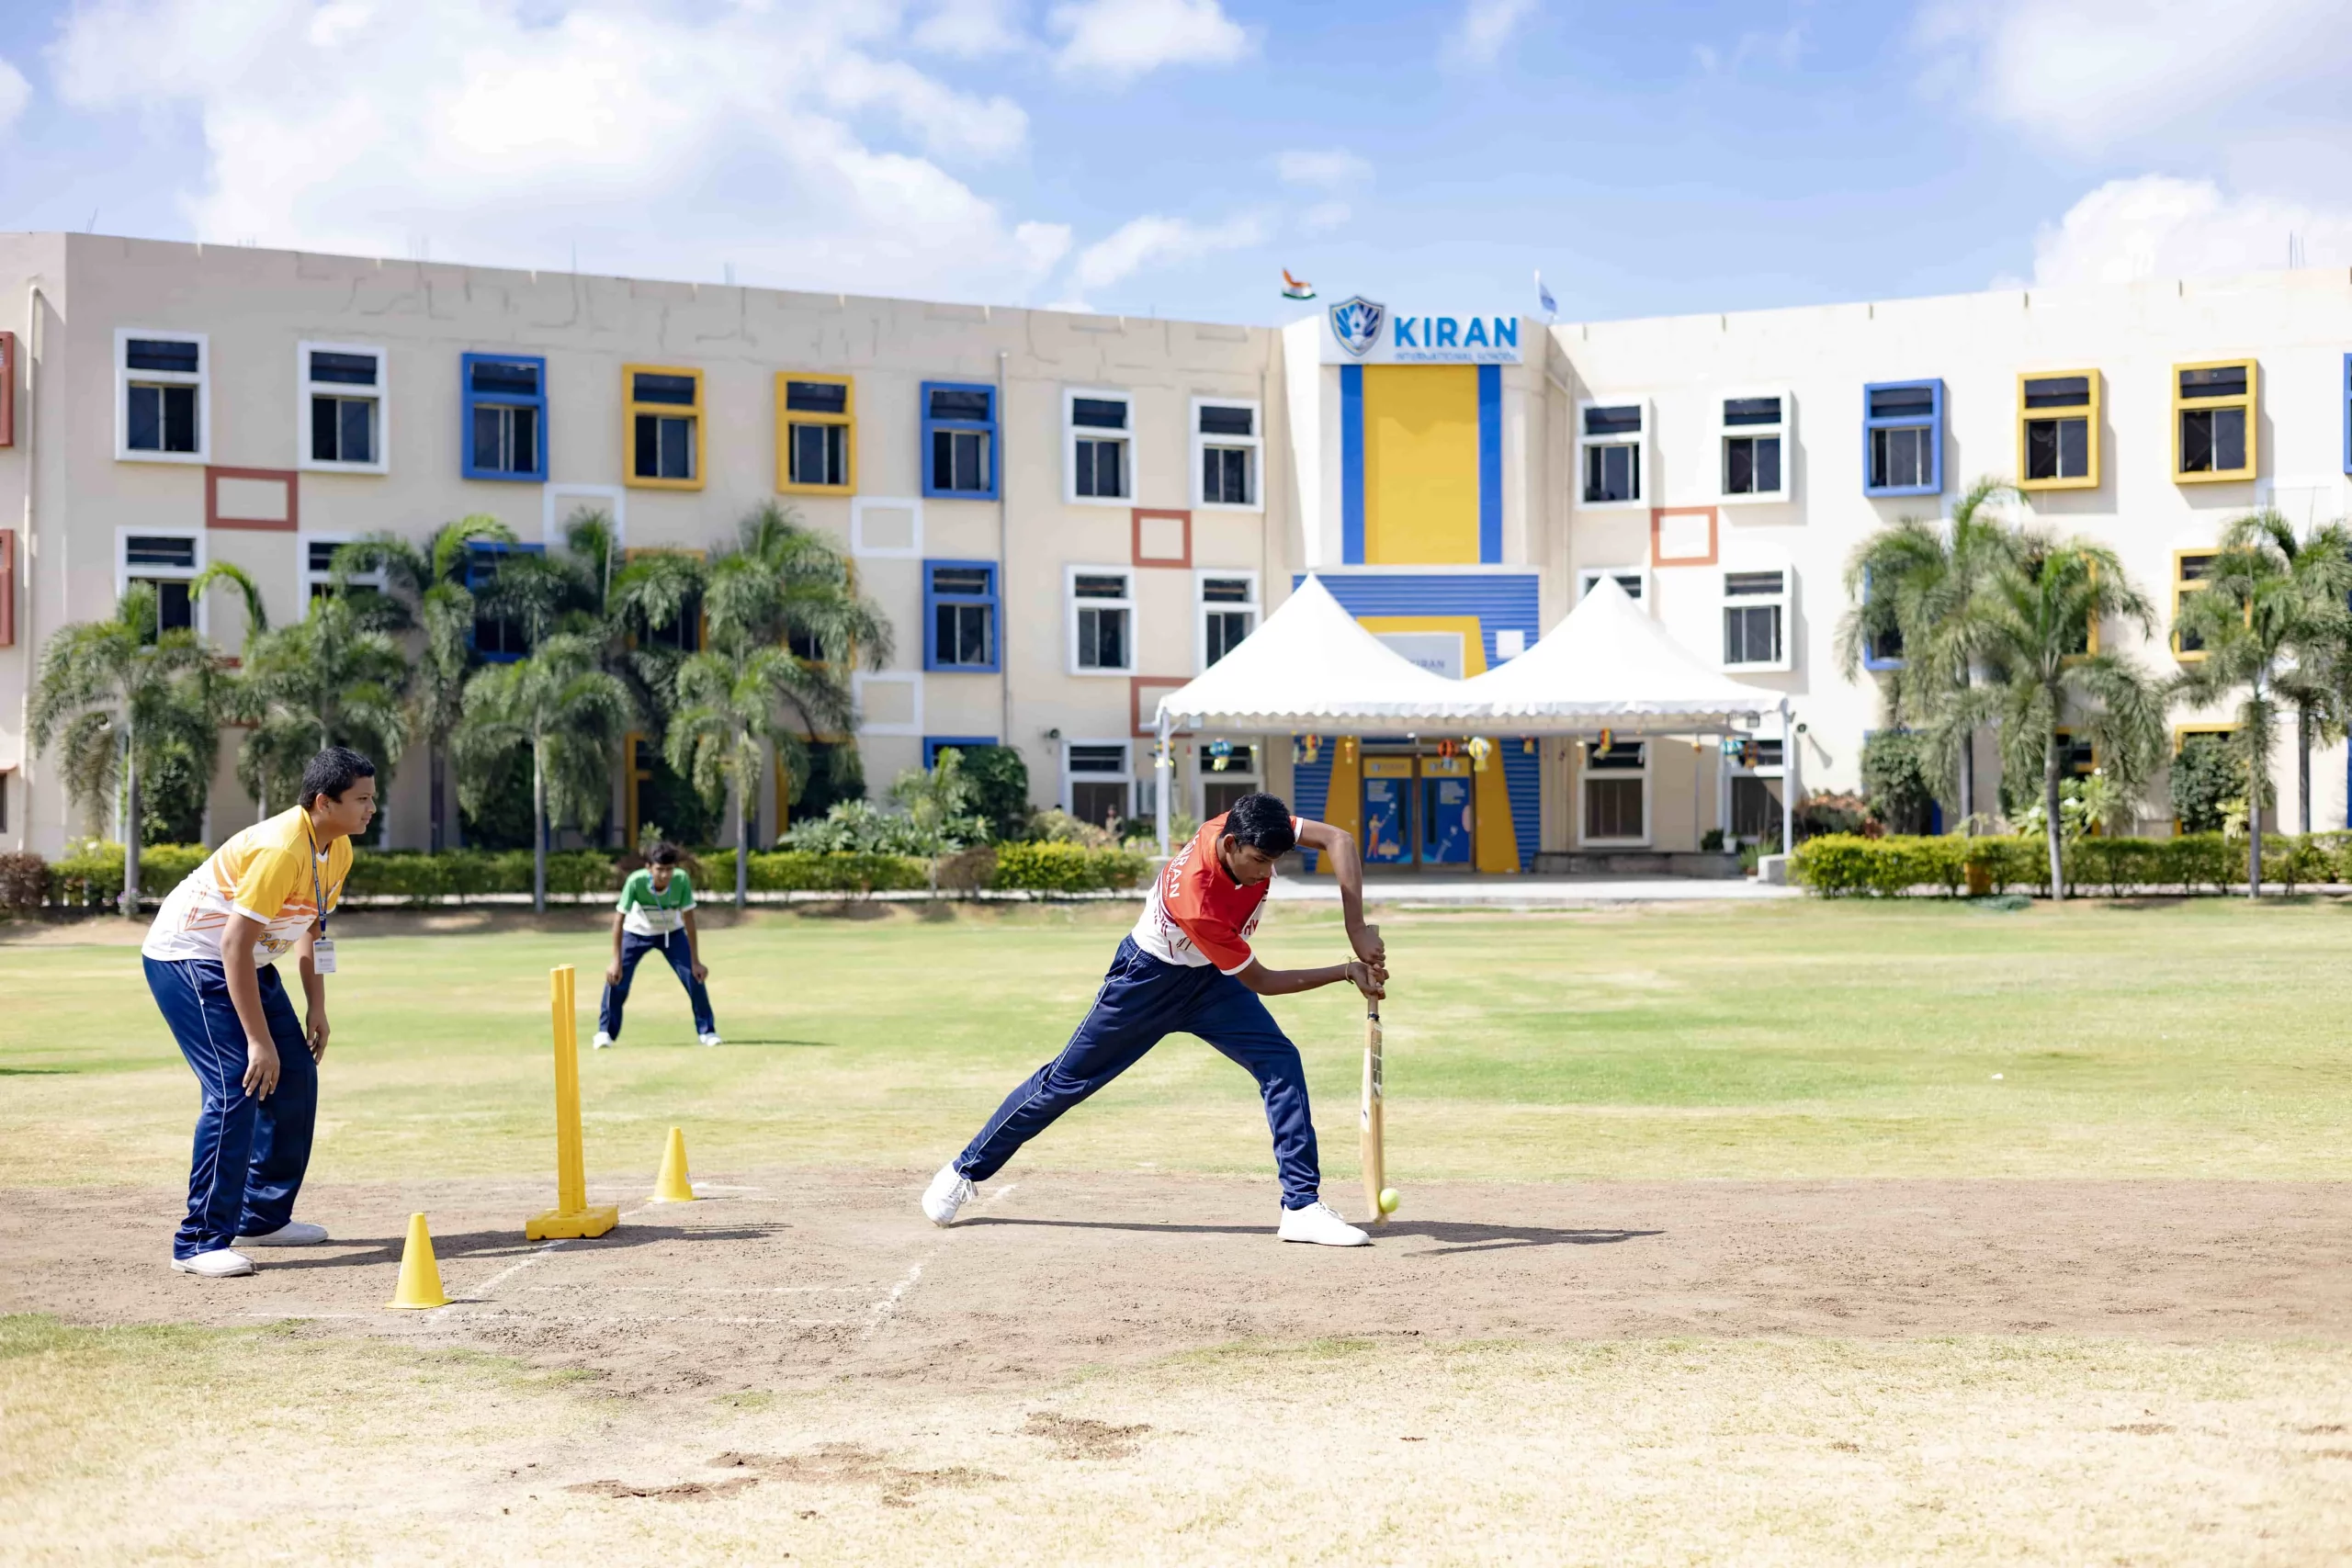 students are playing cricket